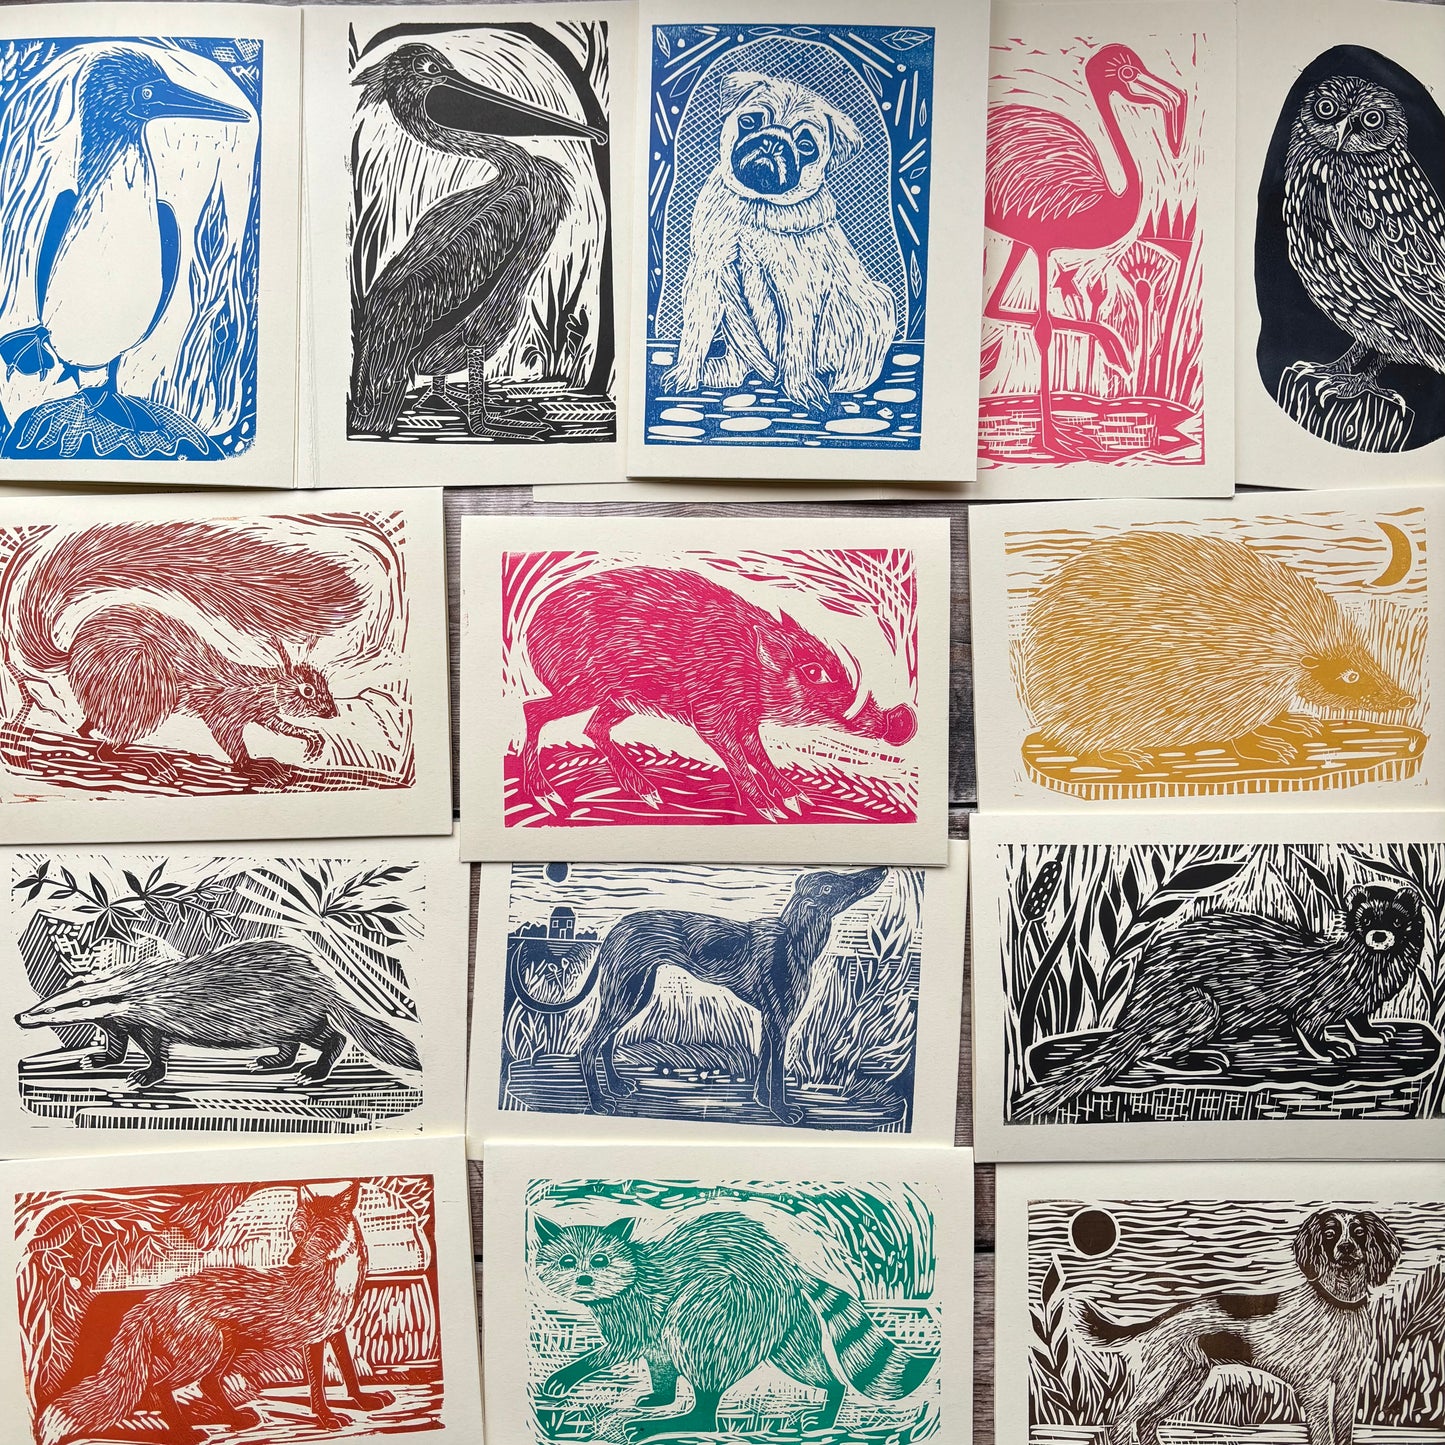 Any 3 handprinted linocut cards for £10